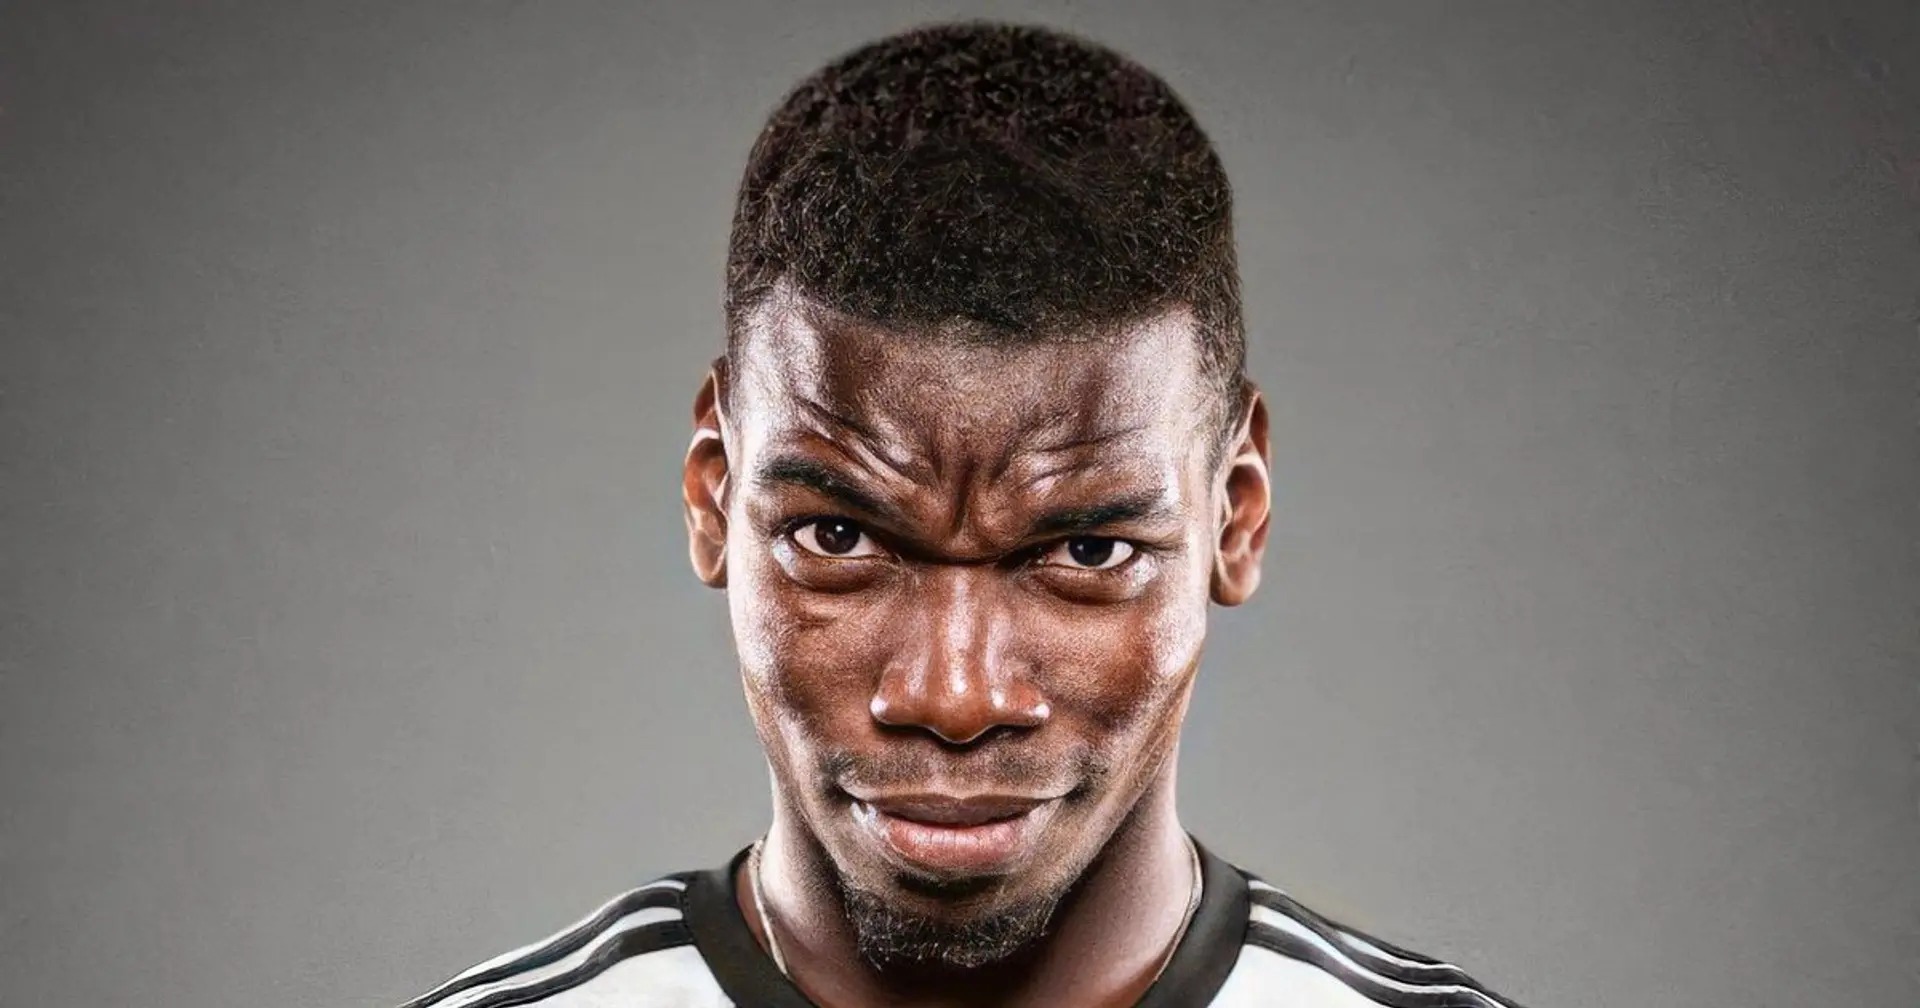 Paul Pogba to Juventus 'done and sealed'